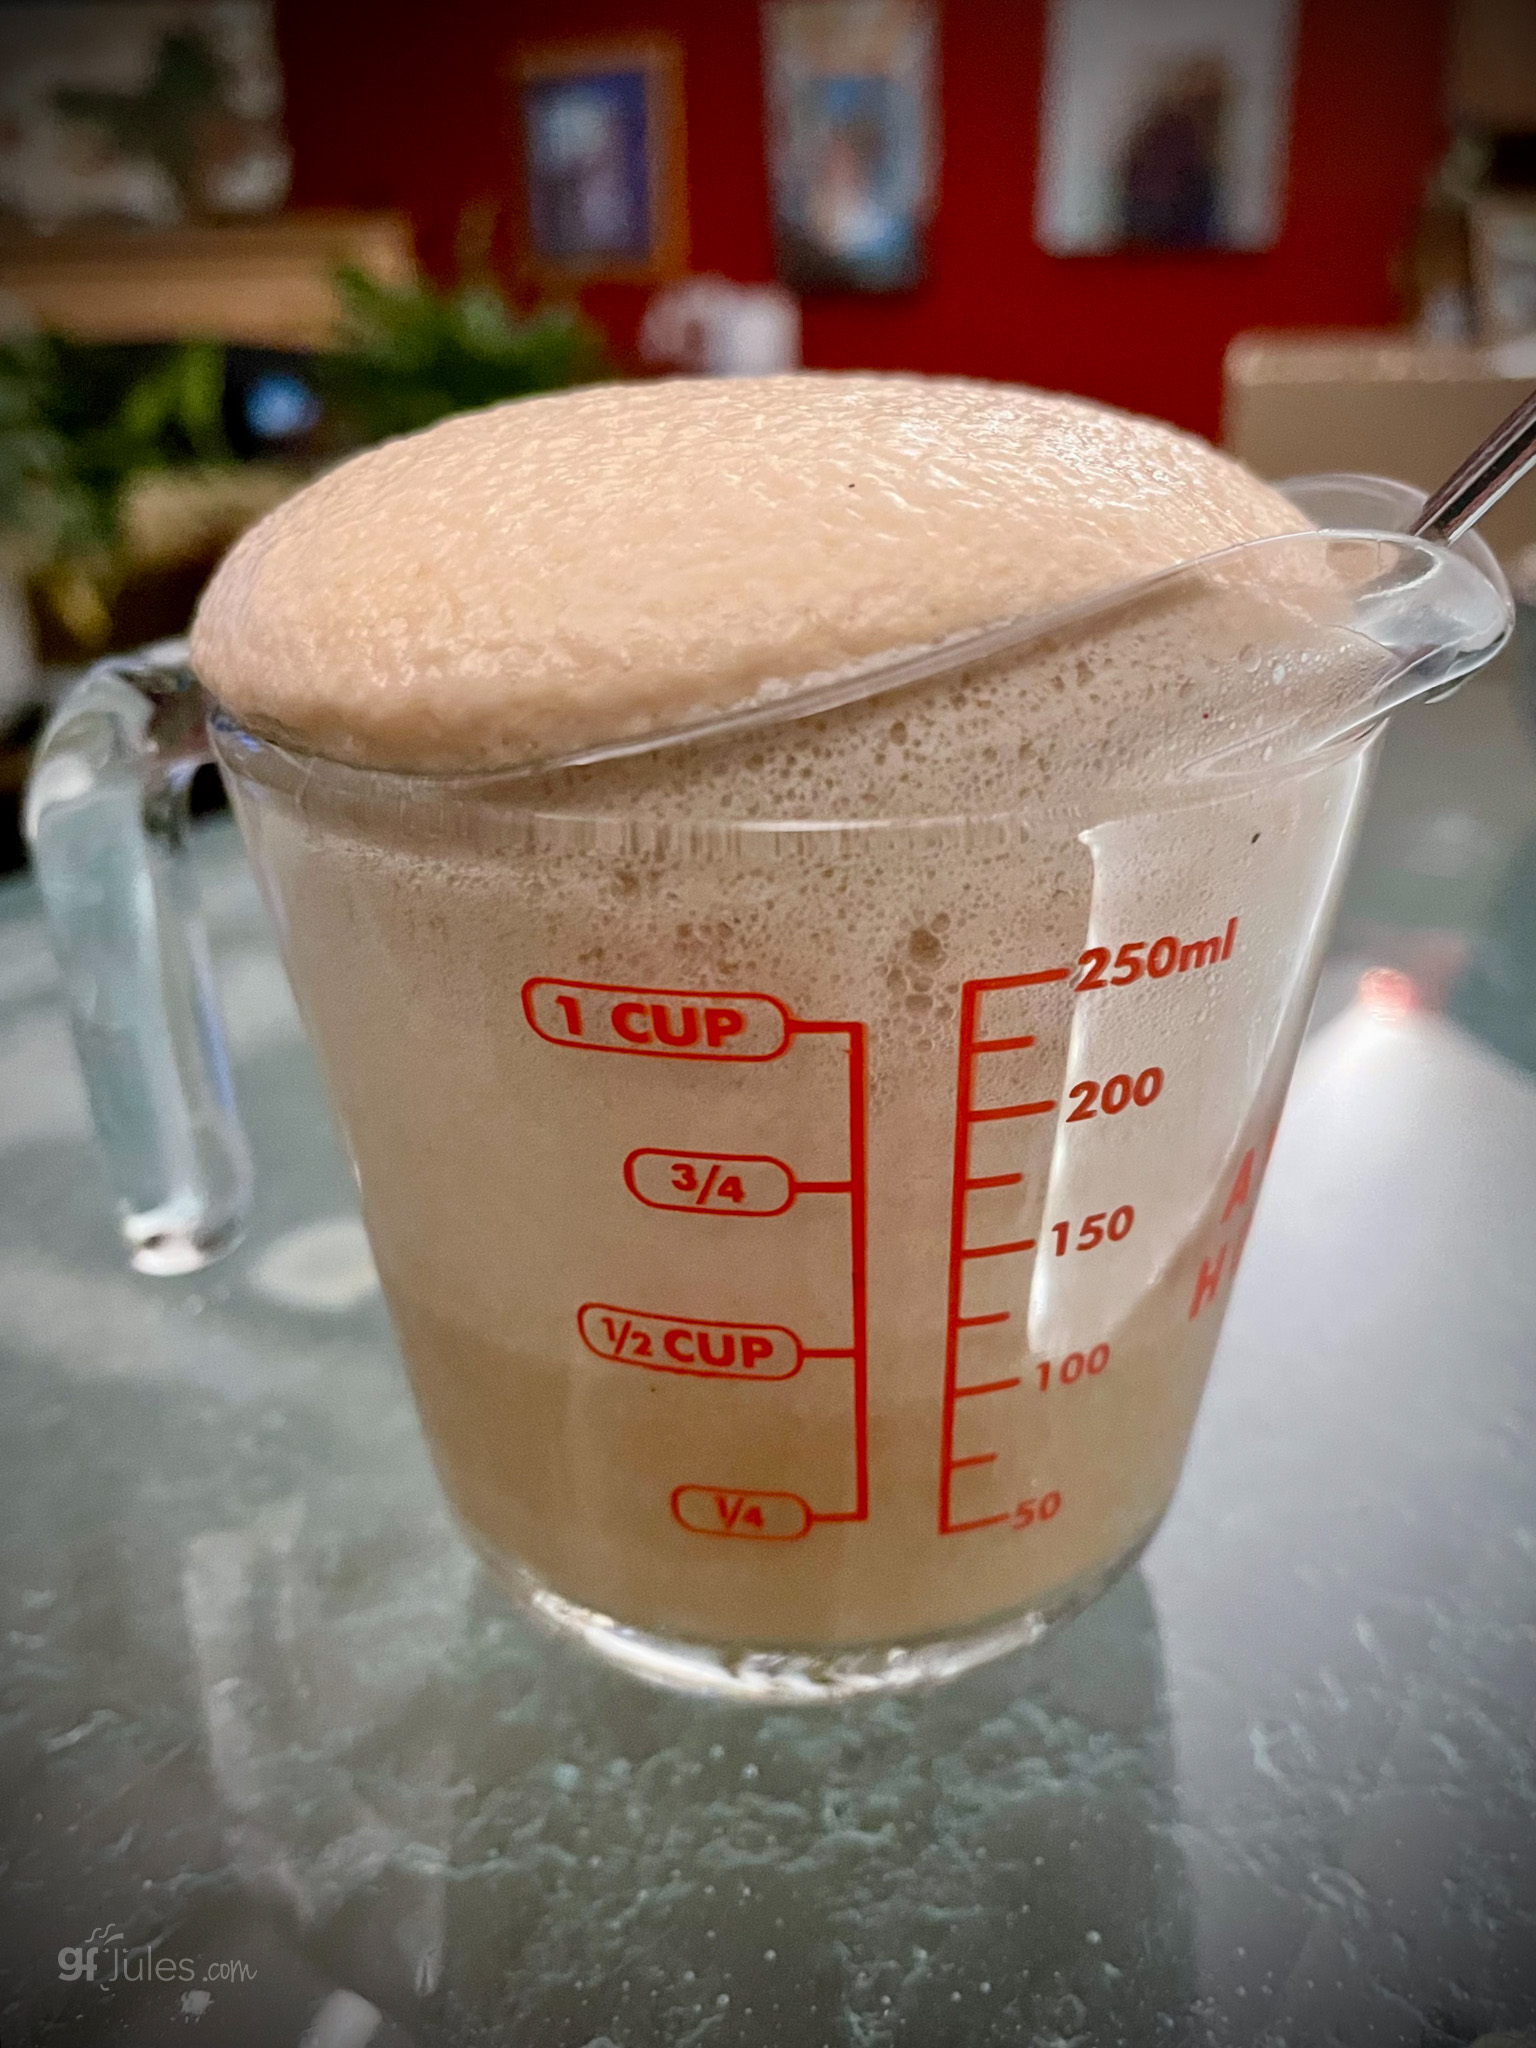 yeast after proofing